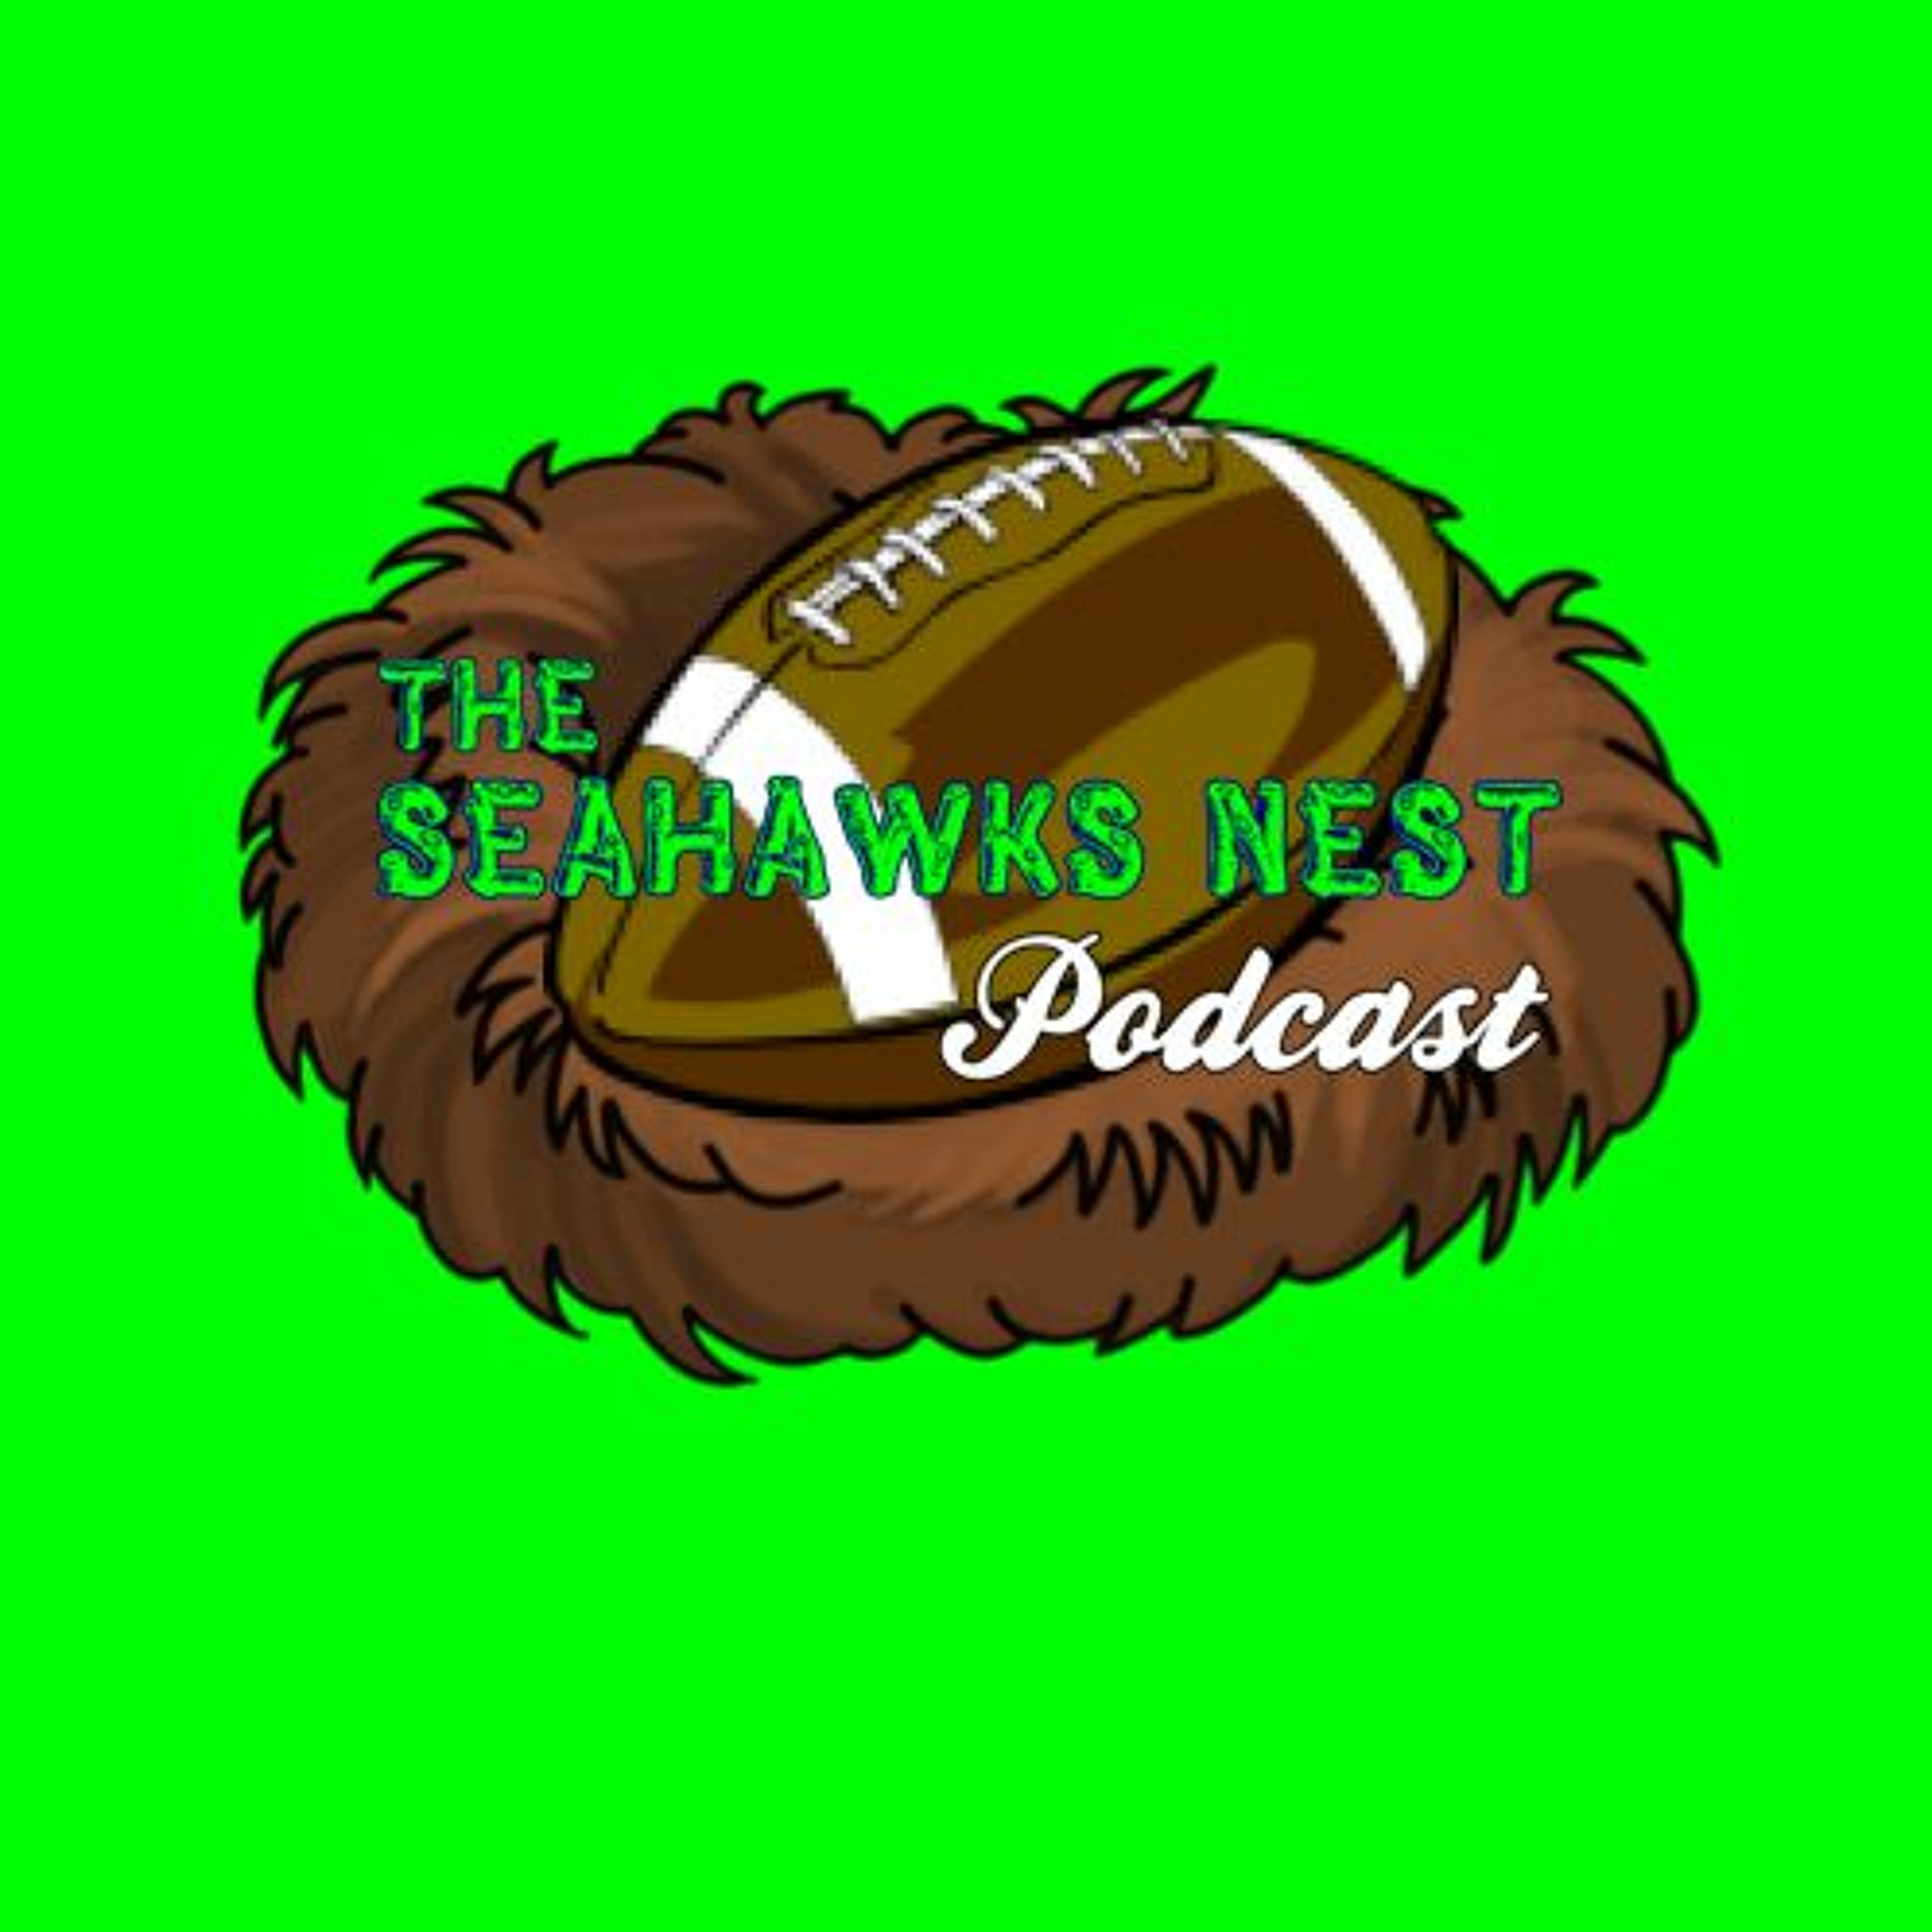 Episode 390 - Seahawks vs the AFC East